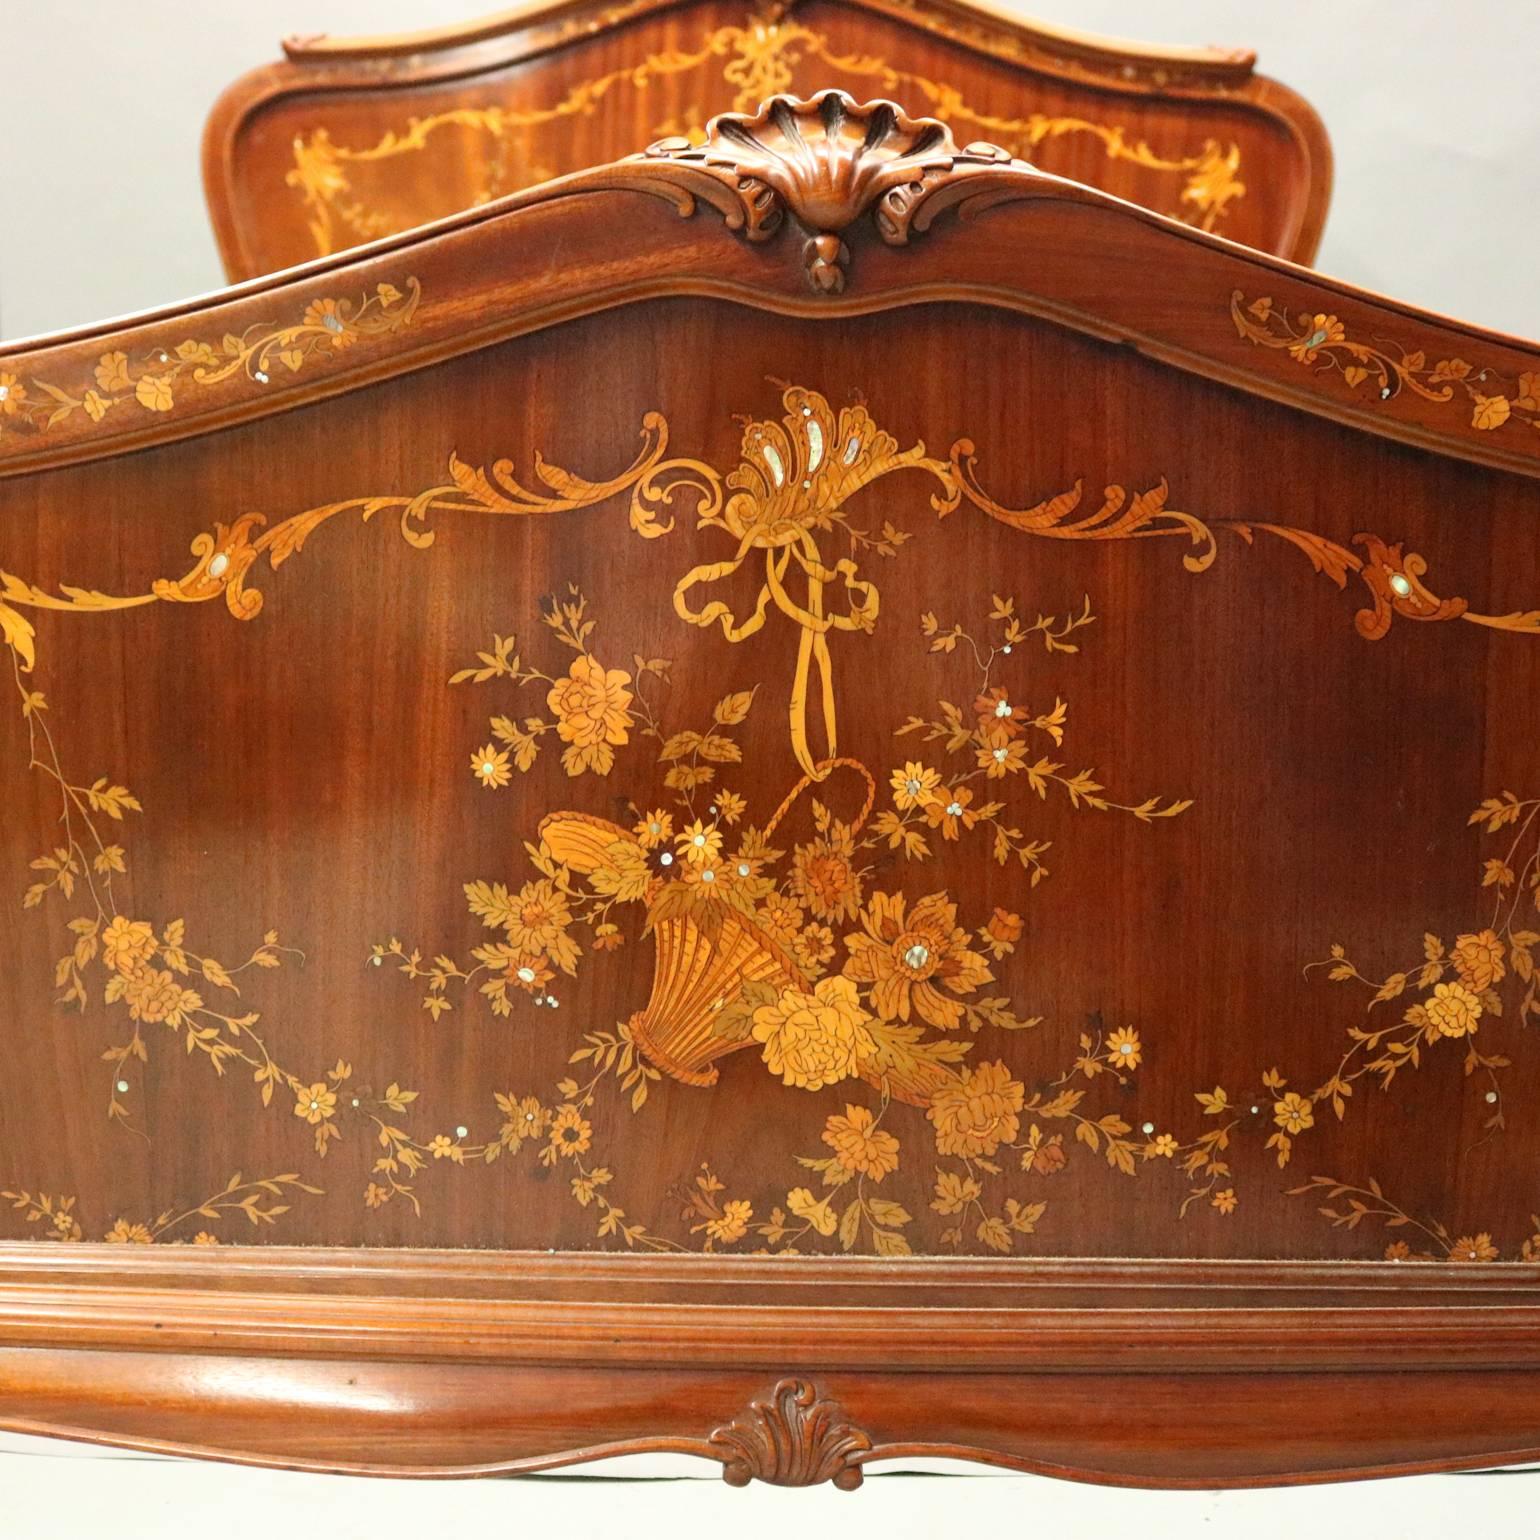 Antique R.J Horner & Co., New York, mahogany double bed with features headboard and footboard with satinwood floral and foliate marquetry and banding, mother-of-pearl inlay accents, carved graduated bellflowers, carved acanthus and stylized shell